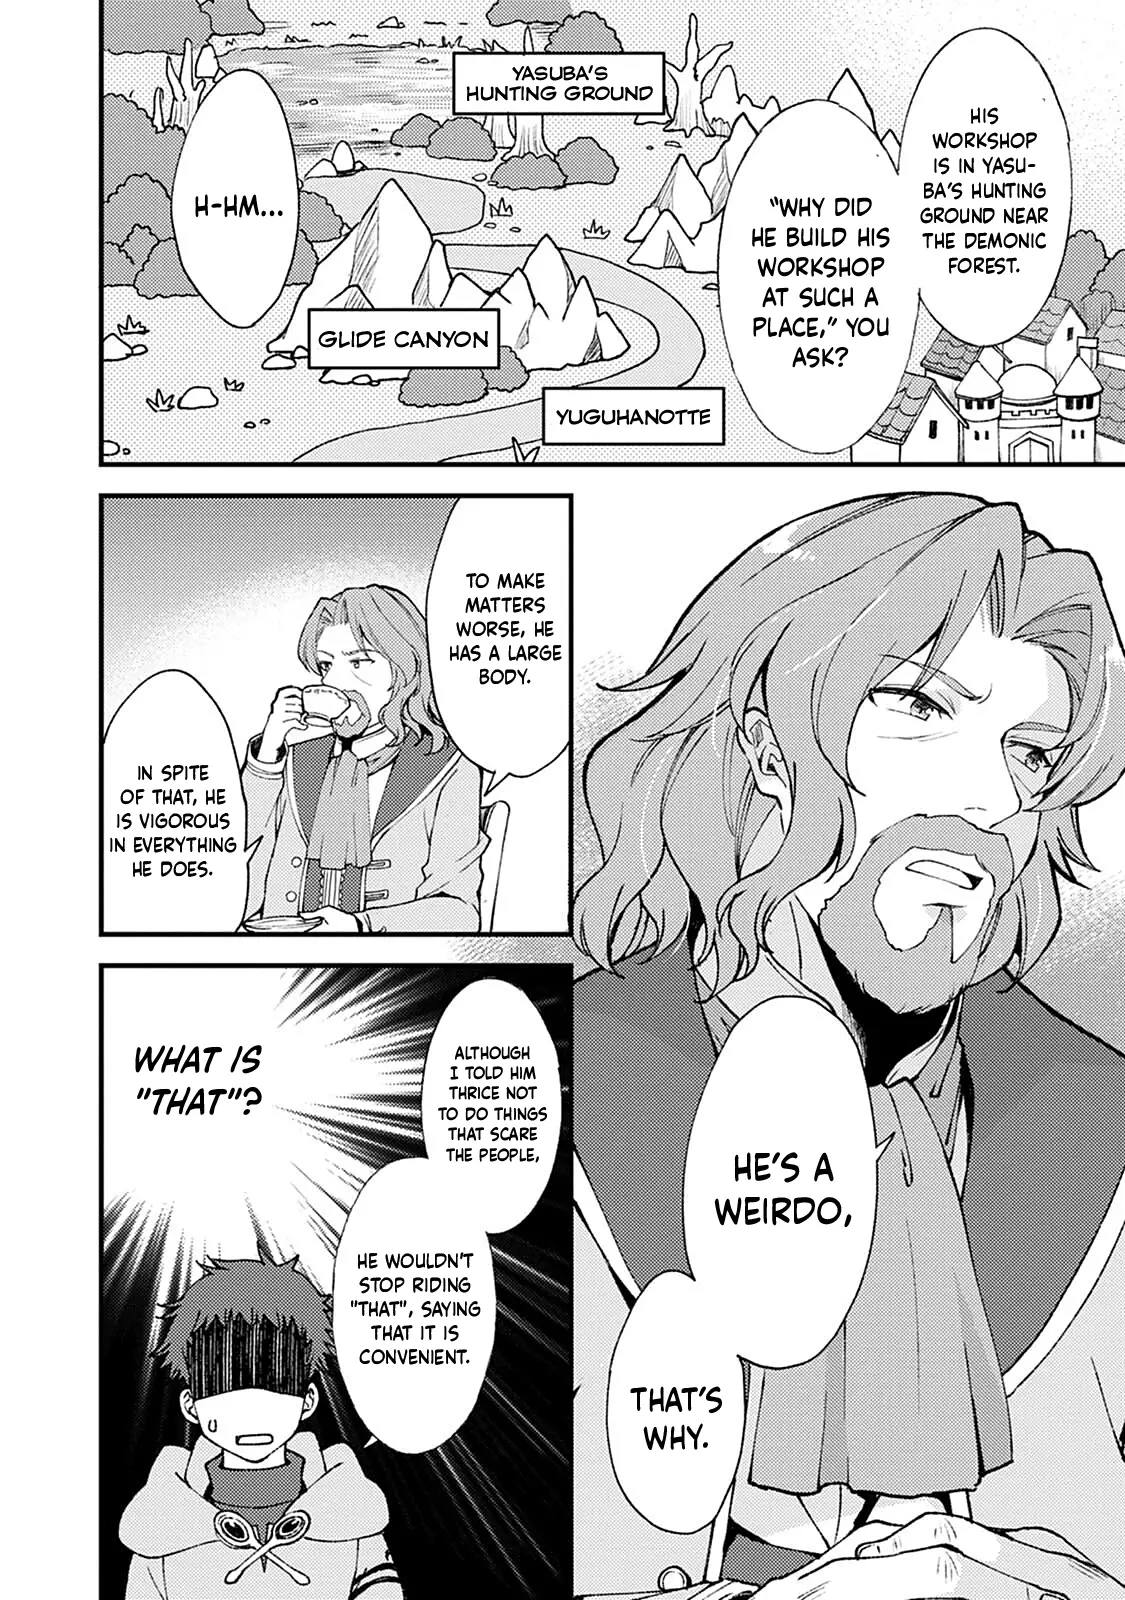 A Sword Master Childhood Friend Power Harassed Me Harshly, So I Broke Off Our Relationship And Made A Fresh Start At The Frontier As A Magic Swordsman - 8 page 17